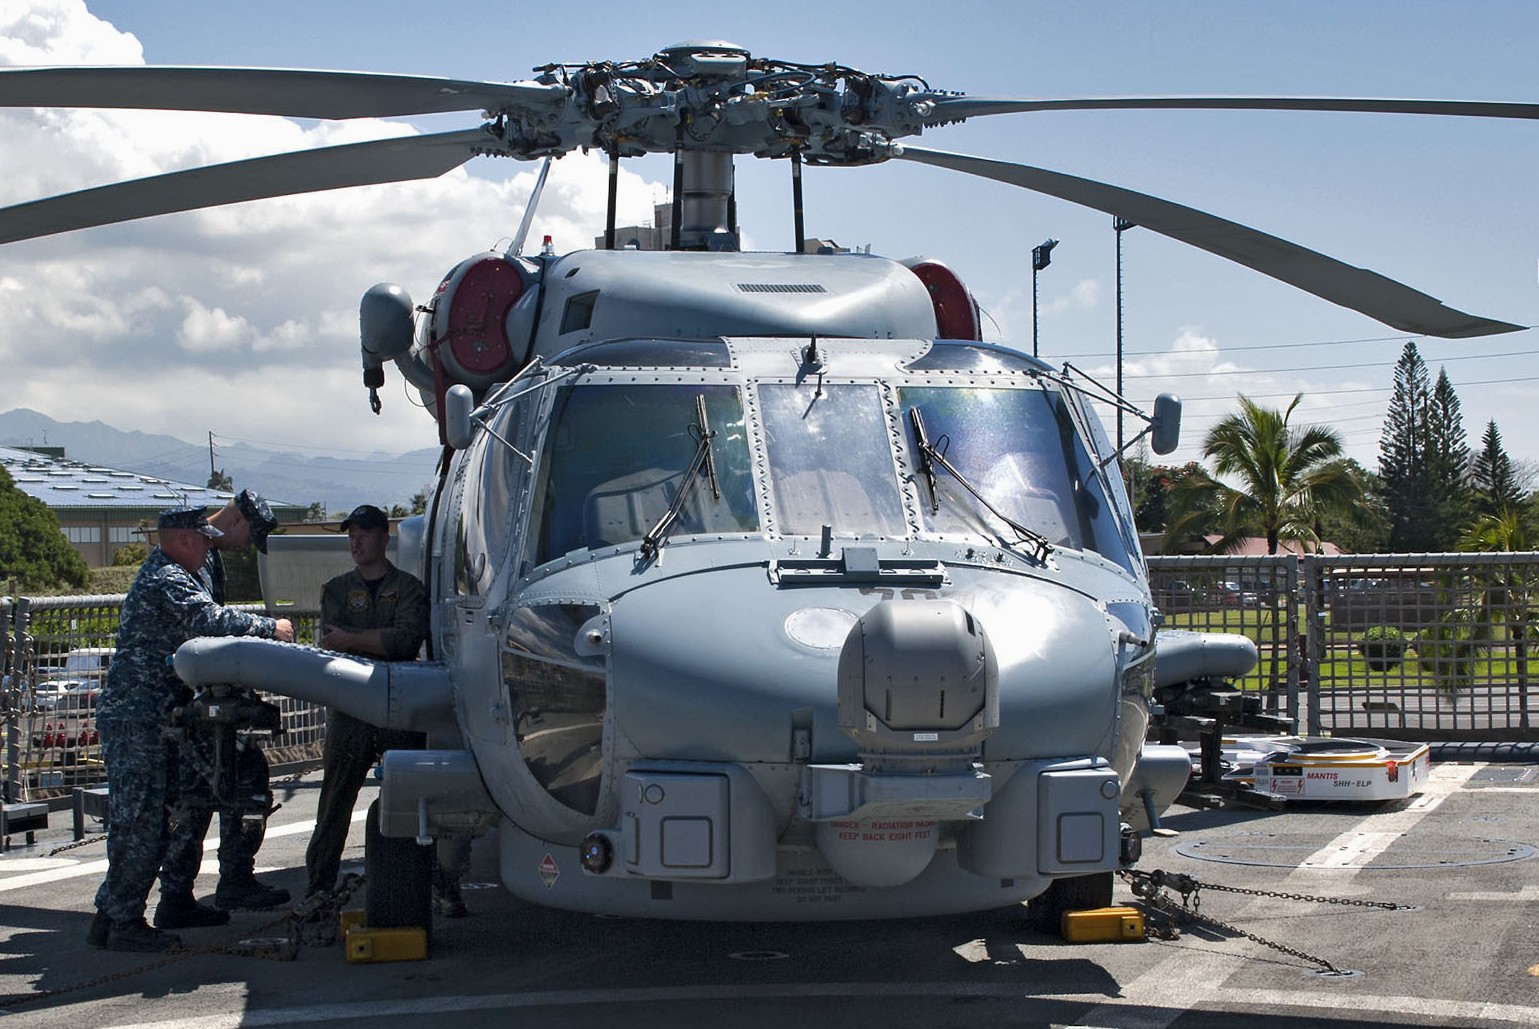 hsm-73 battlecats helicopter maritime strike squadron us navy mh-60r seahawk 2013 64